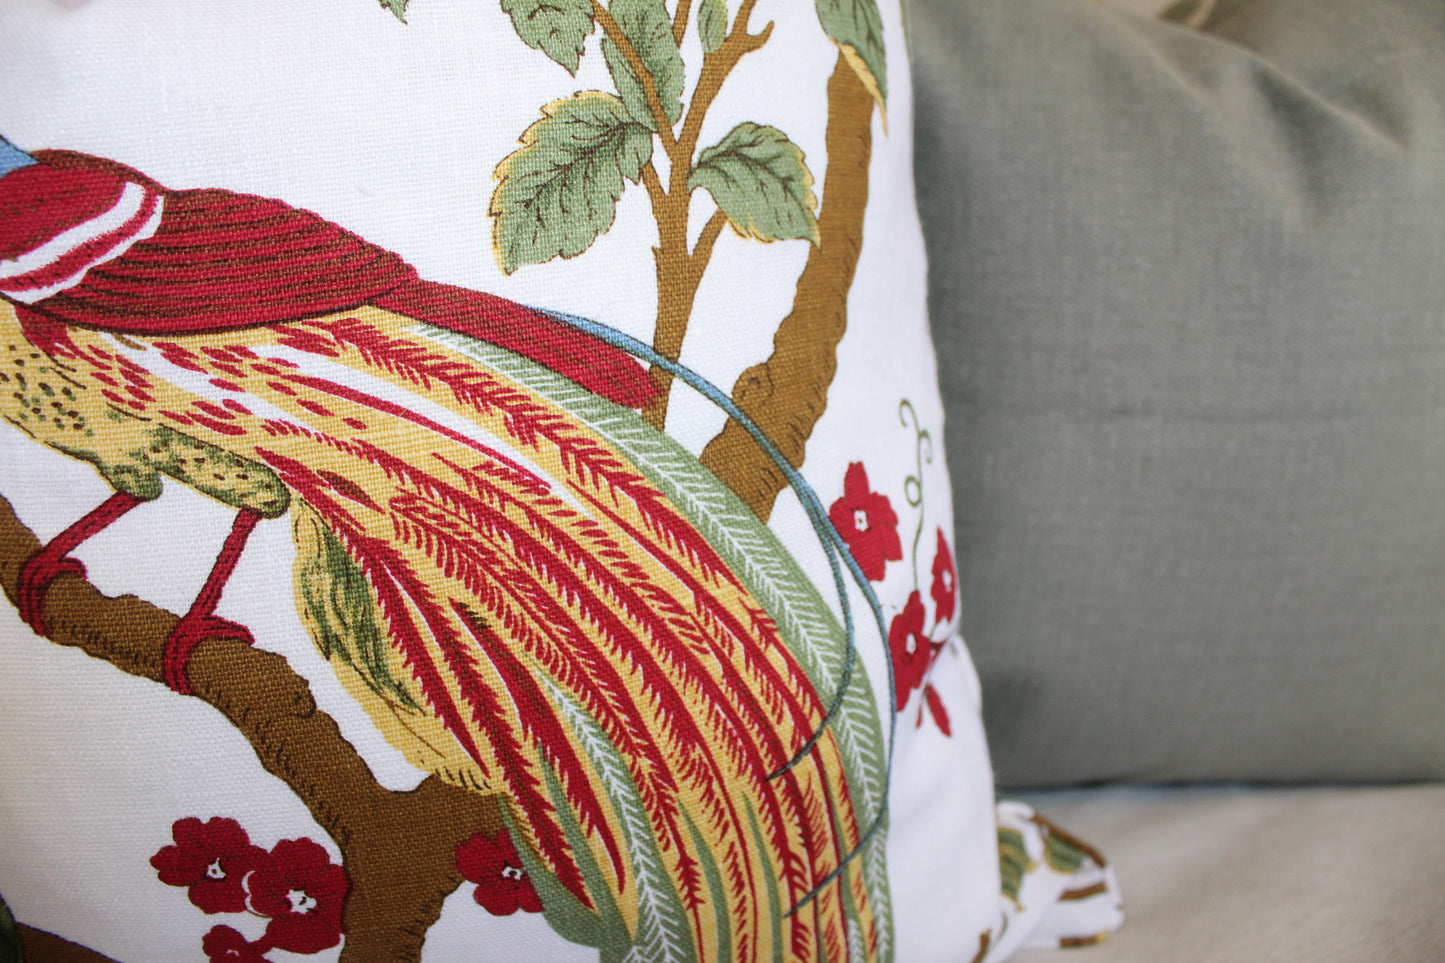 Large Bird featured cushion covers